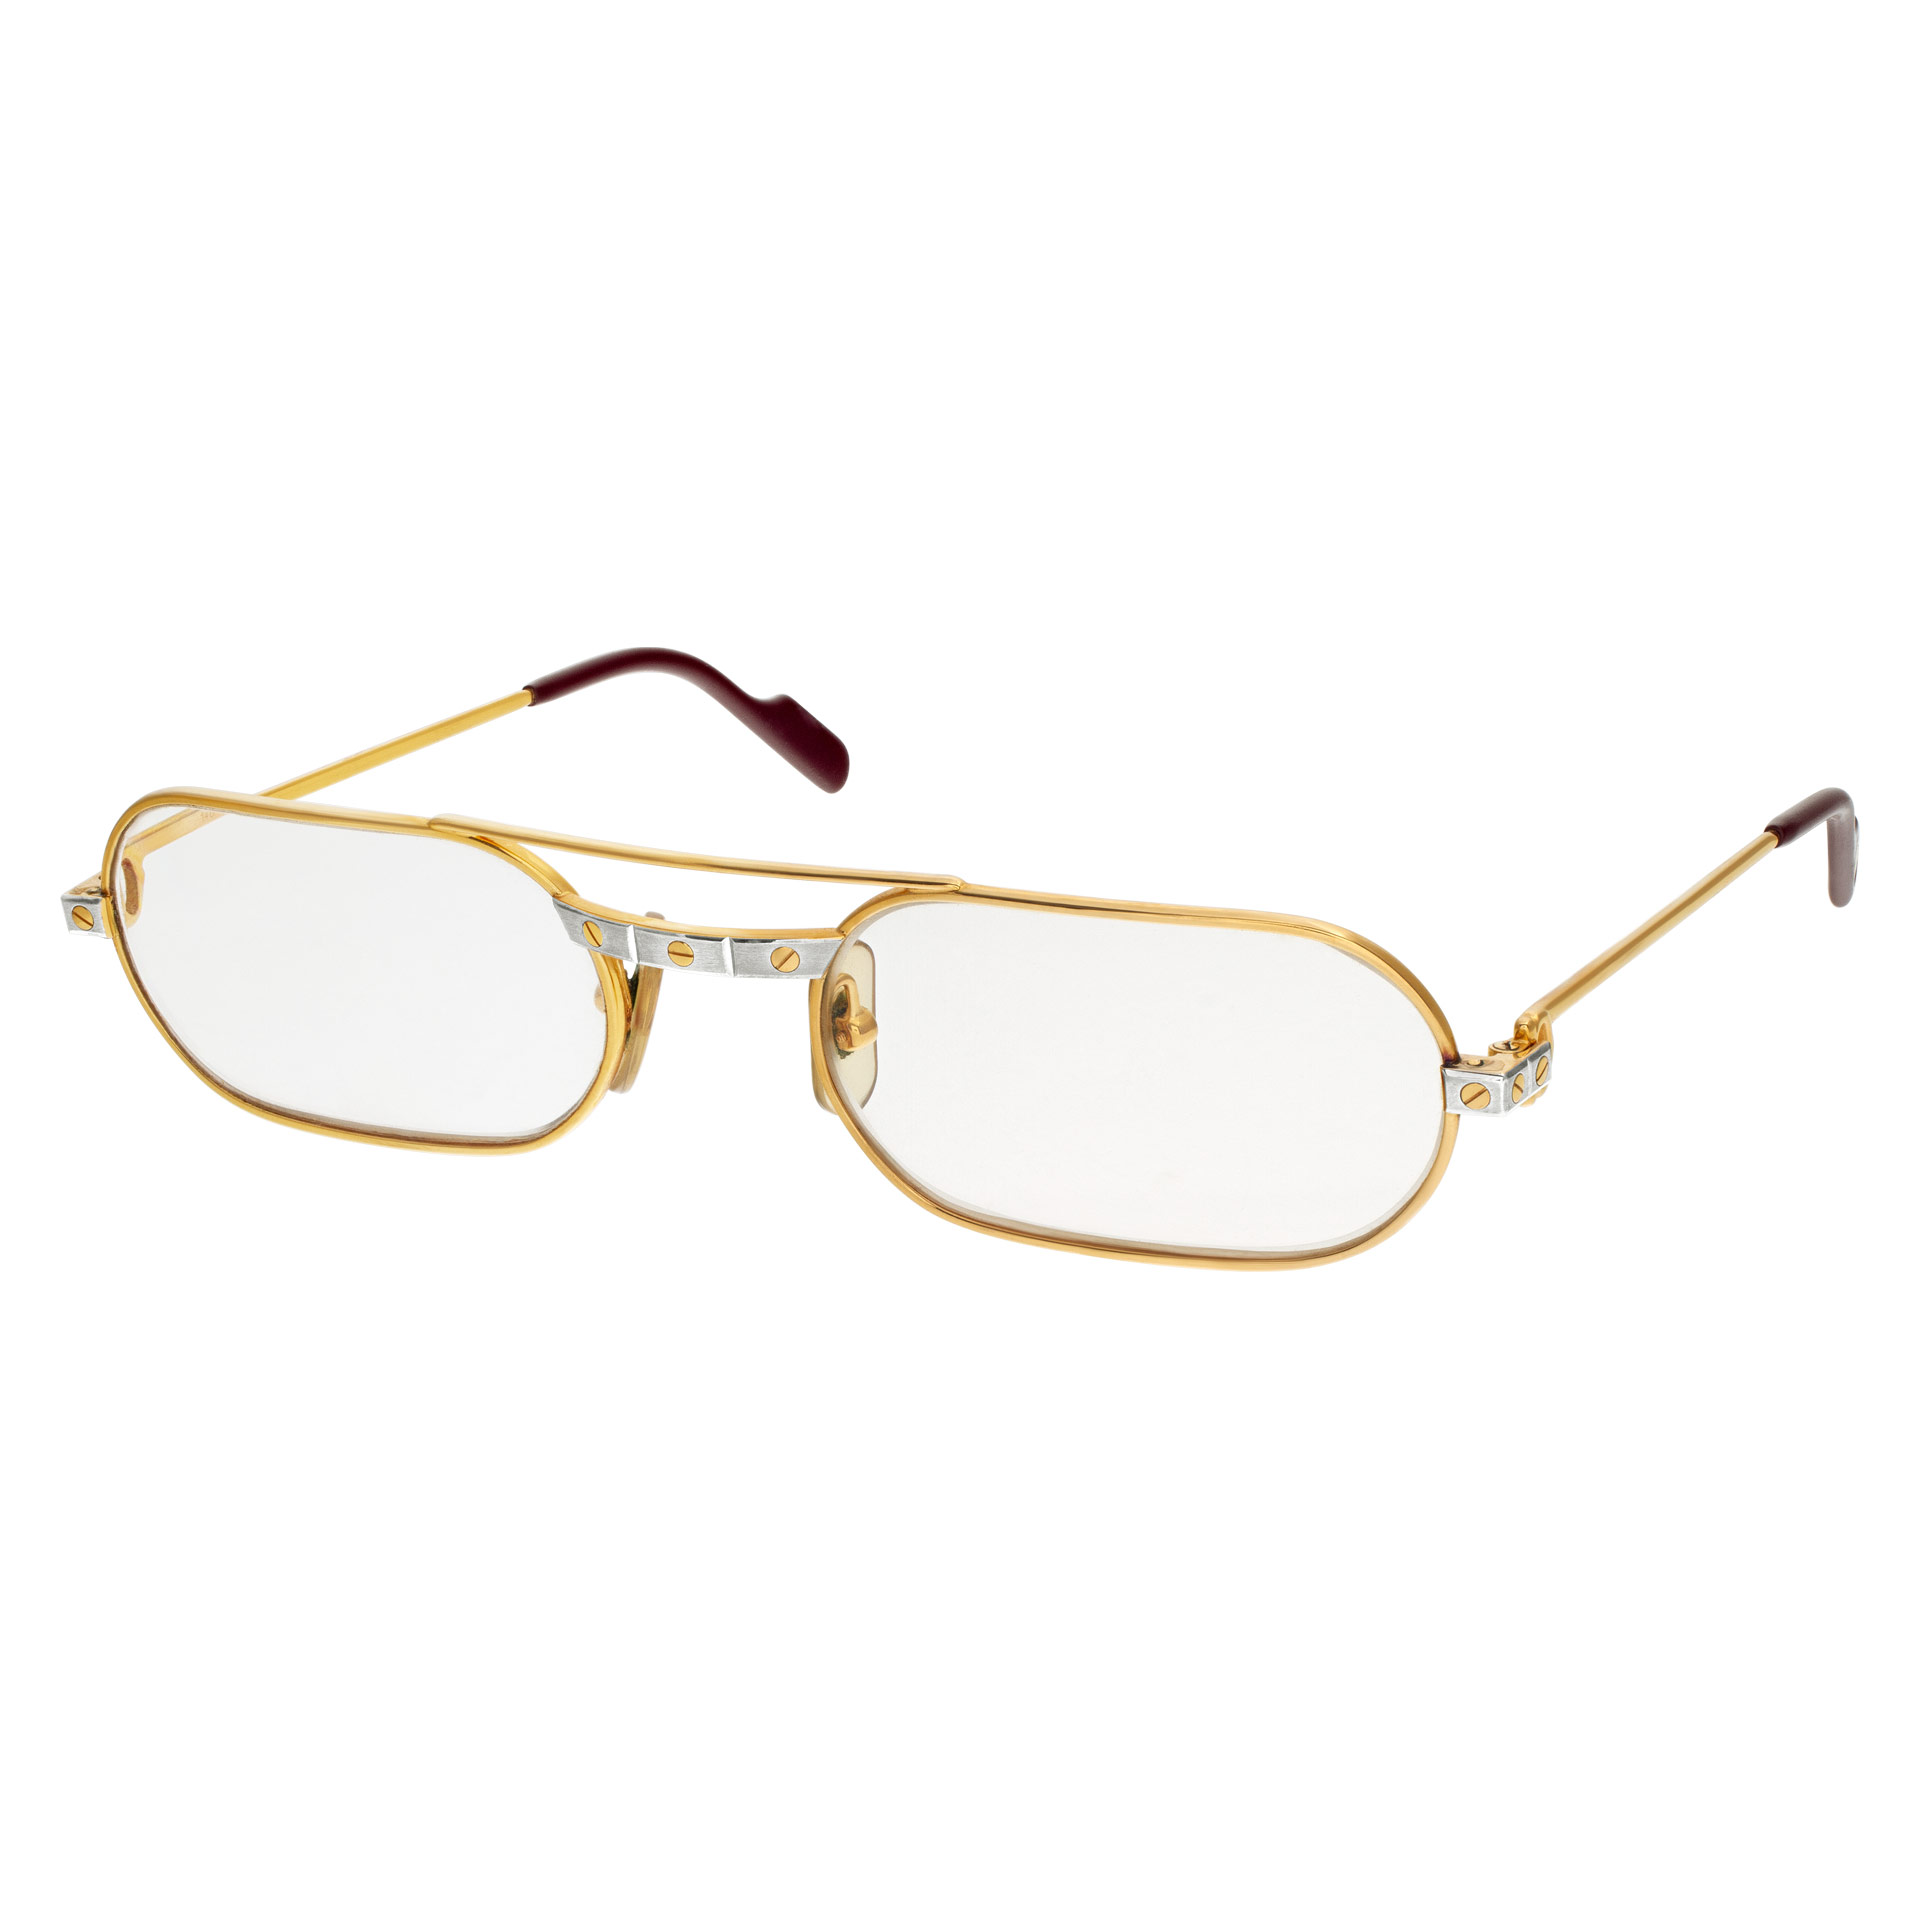 Cartier Santos glasses gold plated image 3